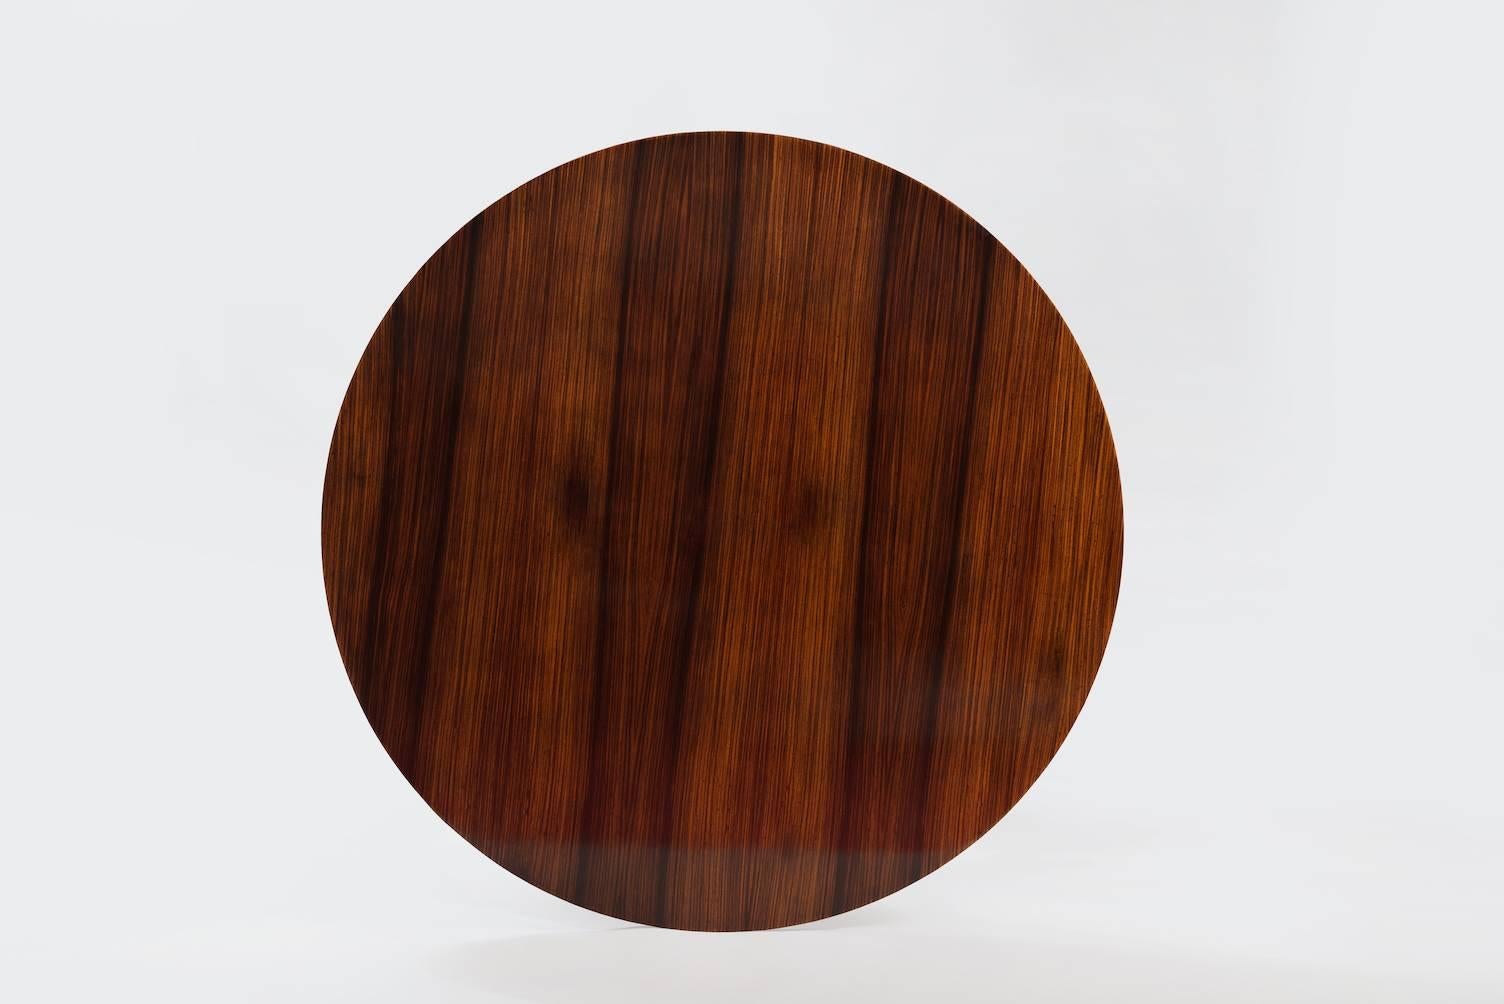 Rosewood and anodized aluminium round dining table.